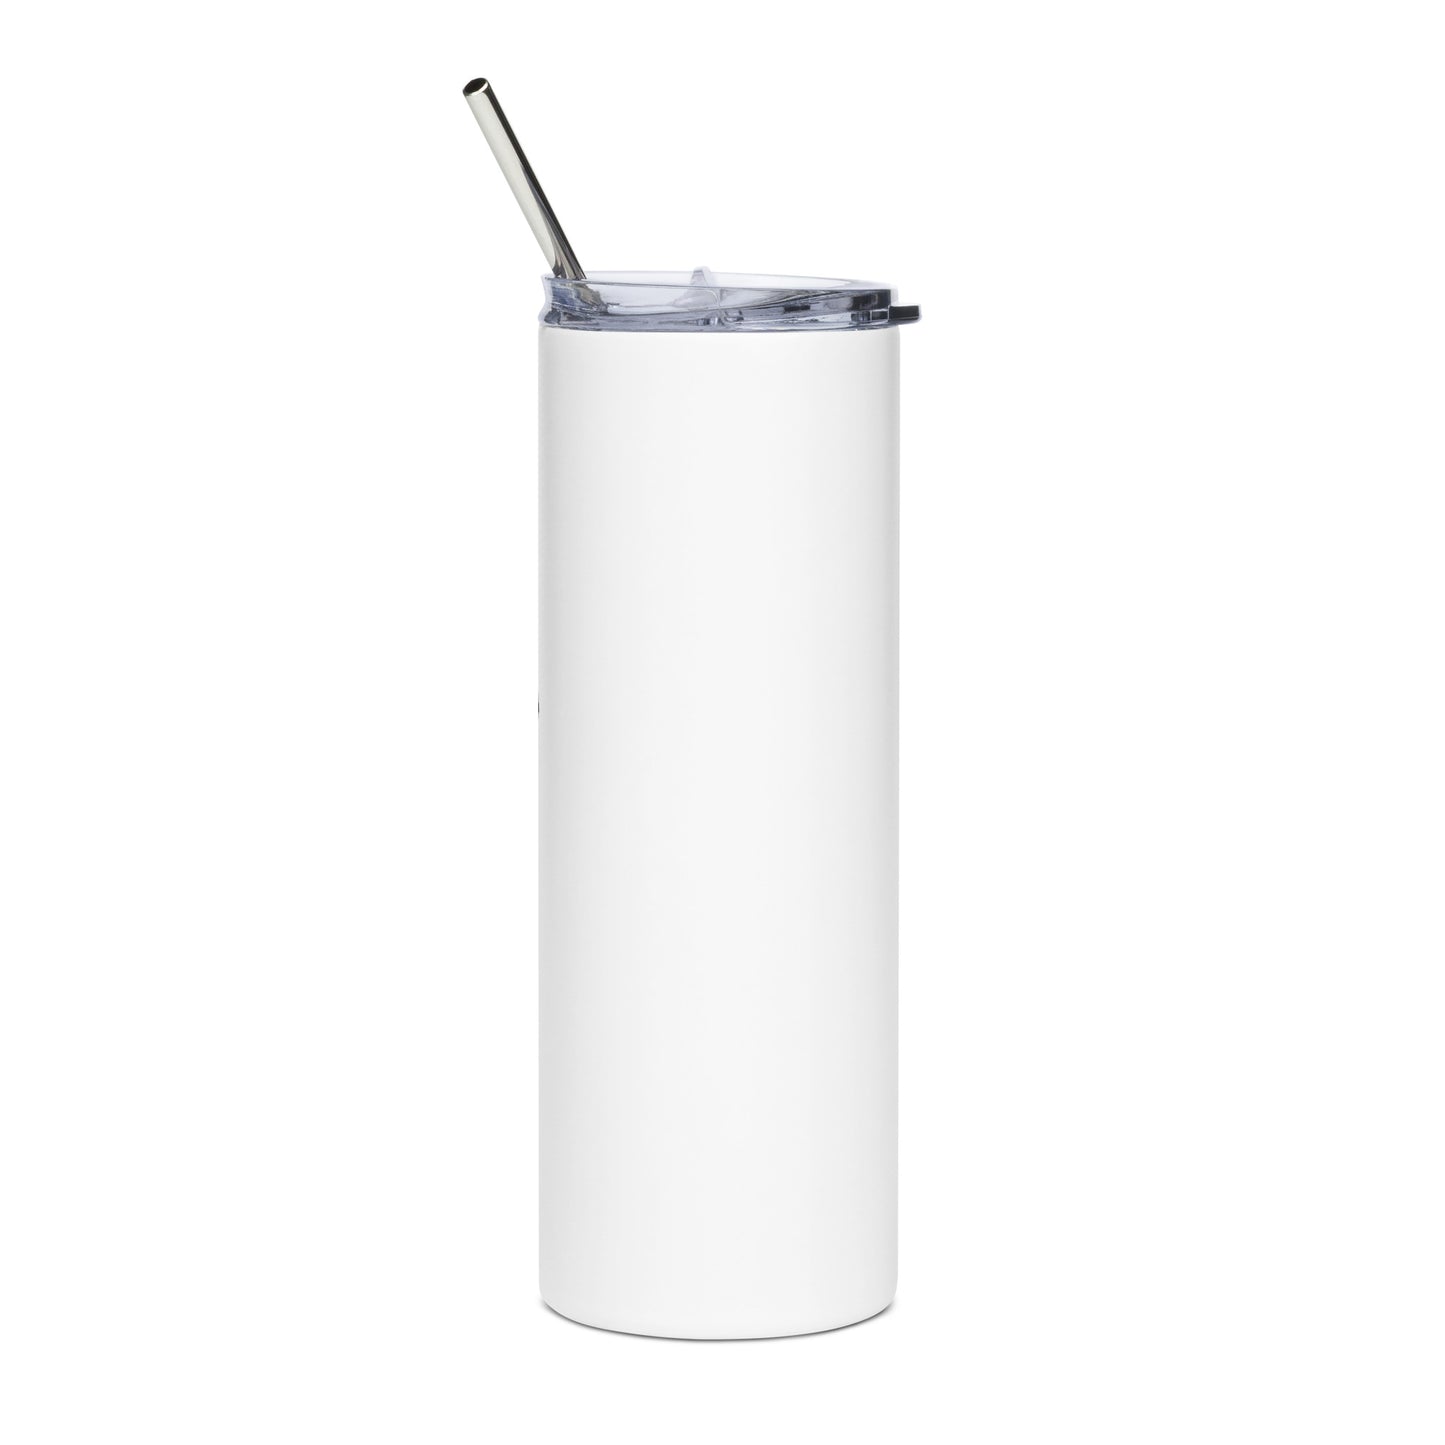 The Hunter 954 Signature Stainless steel tumbler